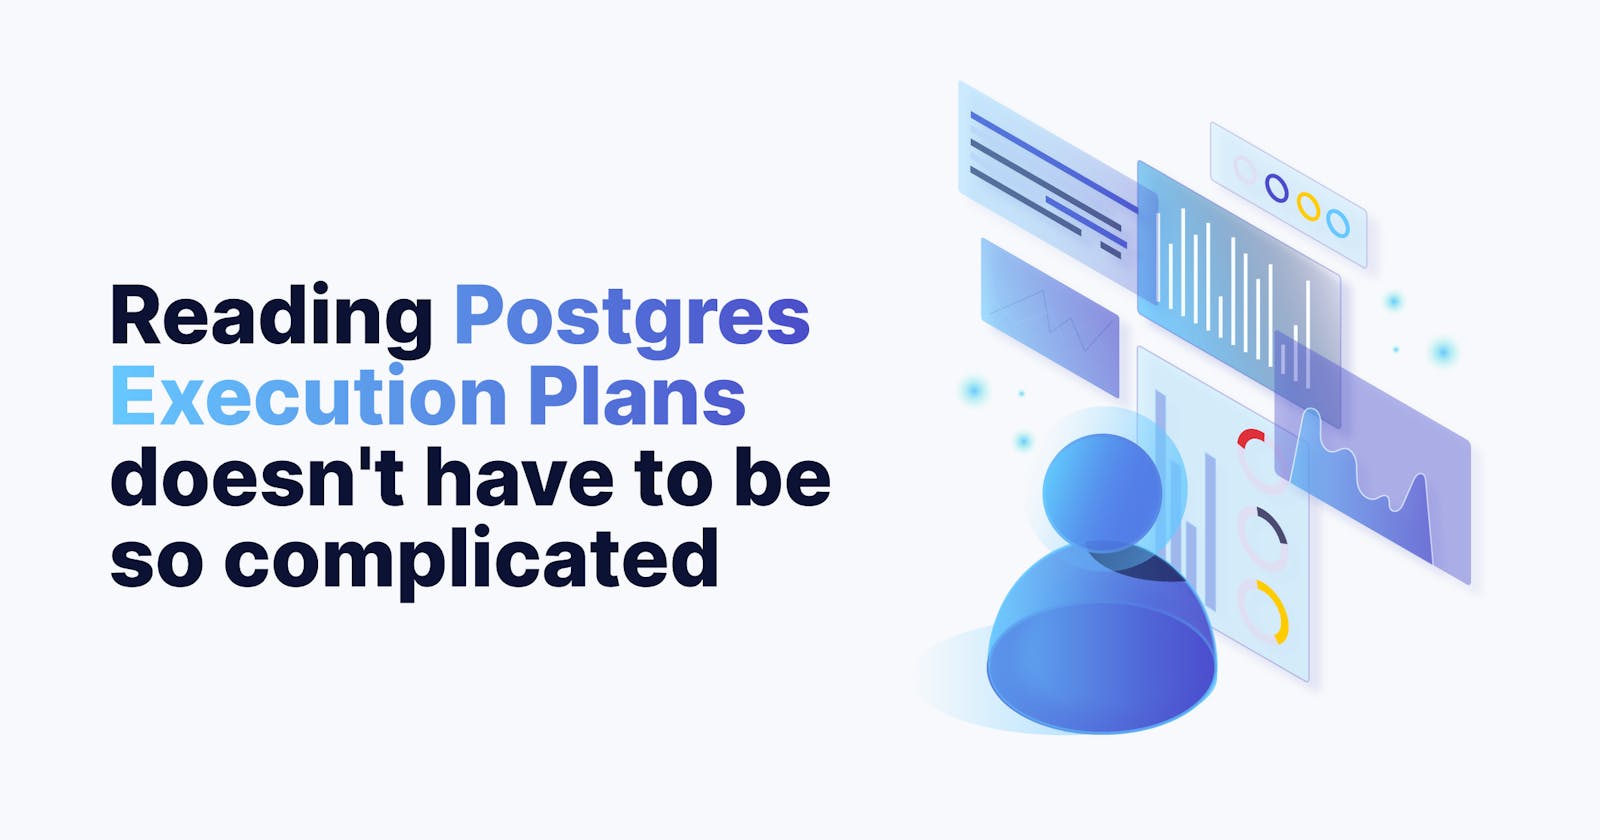 Reading Postgres Execution Plans doesn't have to be so complicated